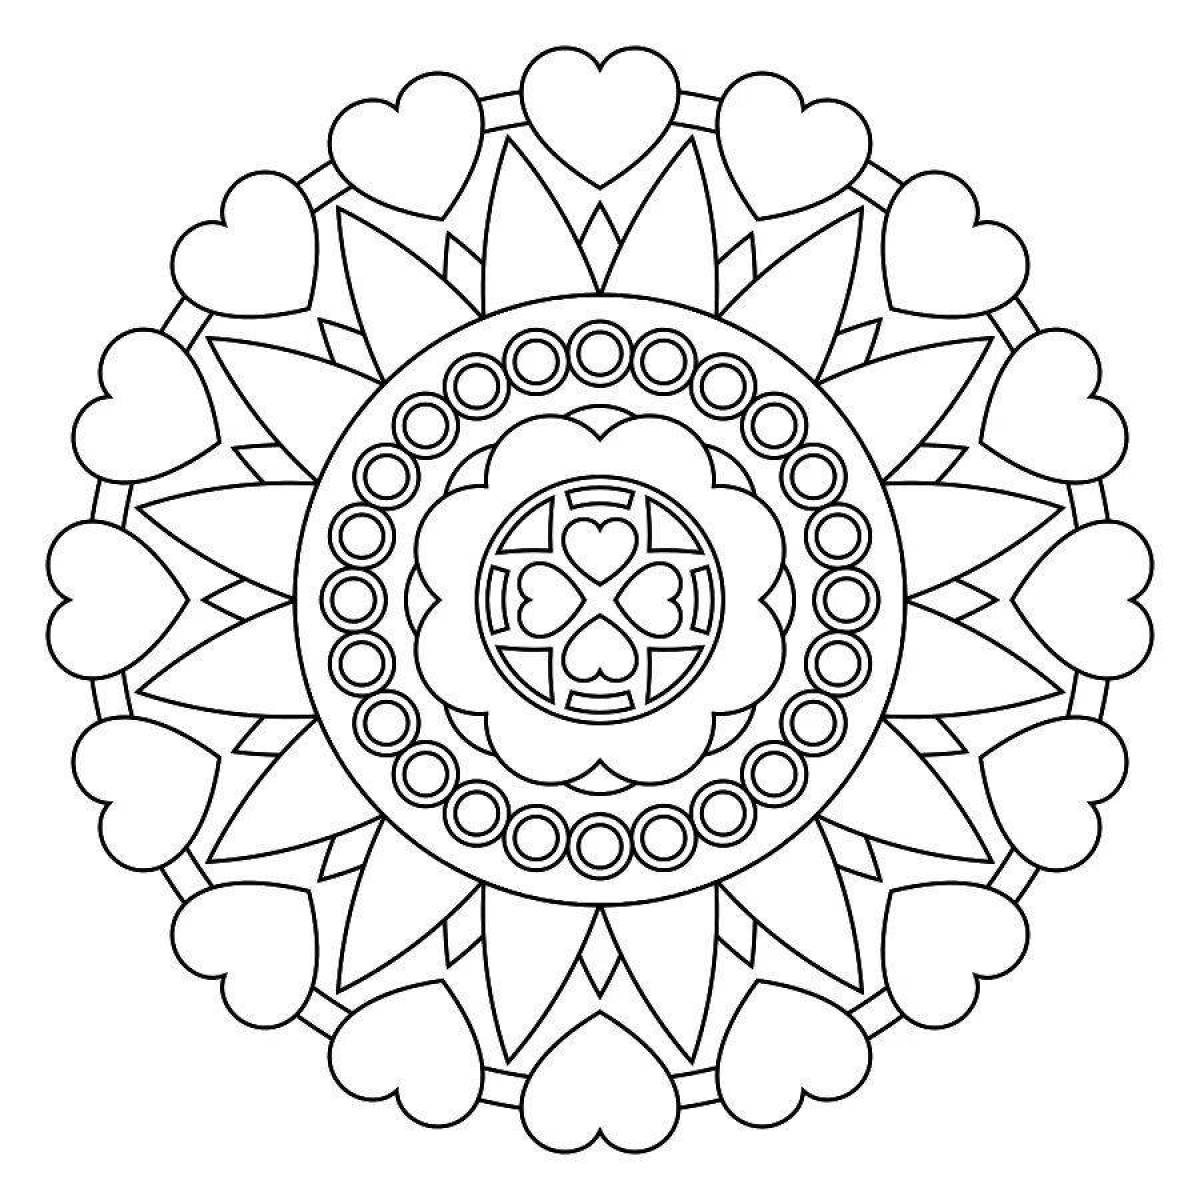 Coloring mandalas for children 5-6 years old